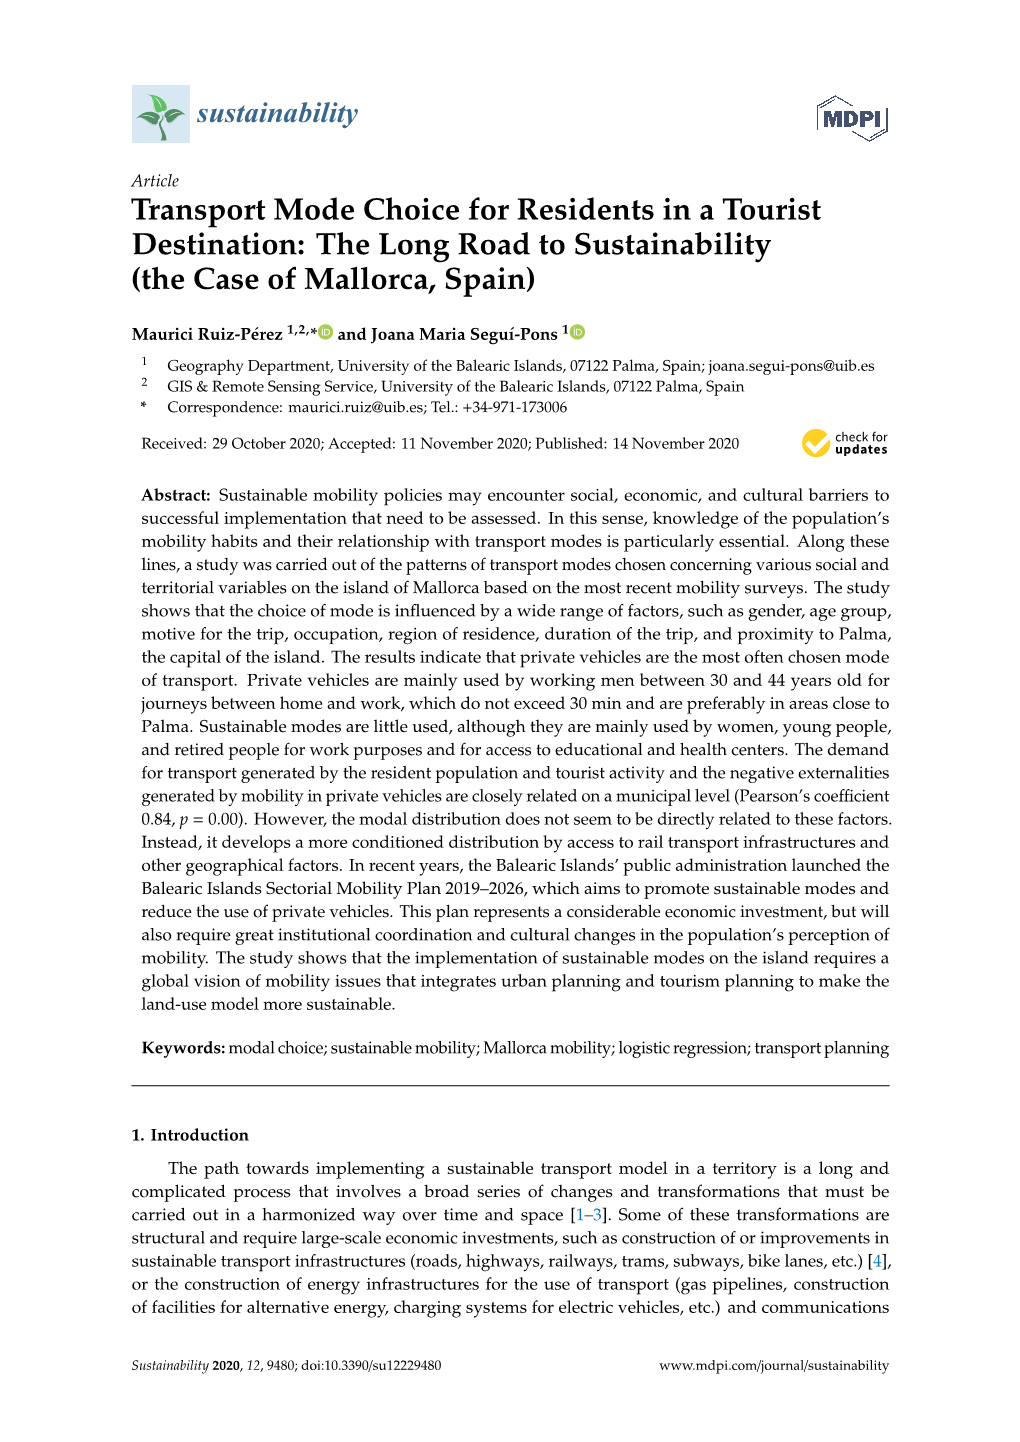 Transport Mode Choice for Residents in a Tourist Destination: the Long Road to Sustainability (The Case of Mallorca, Spain)